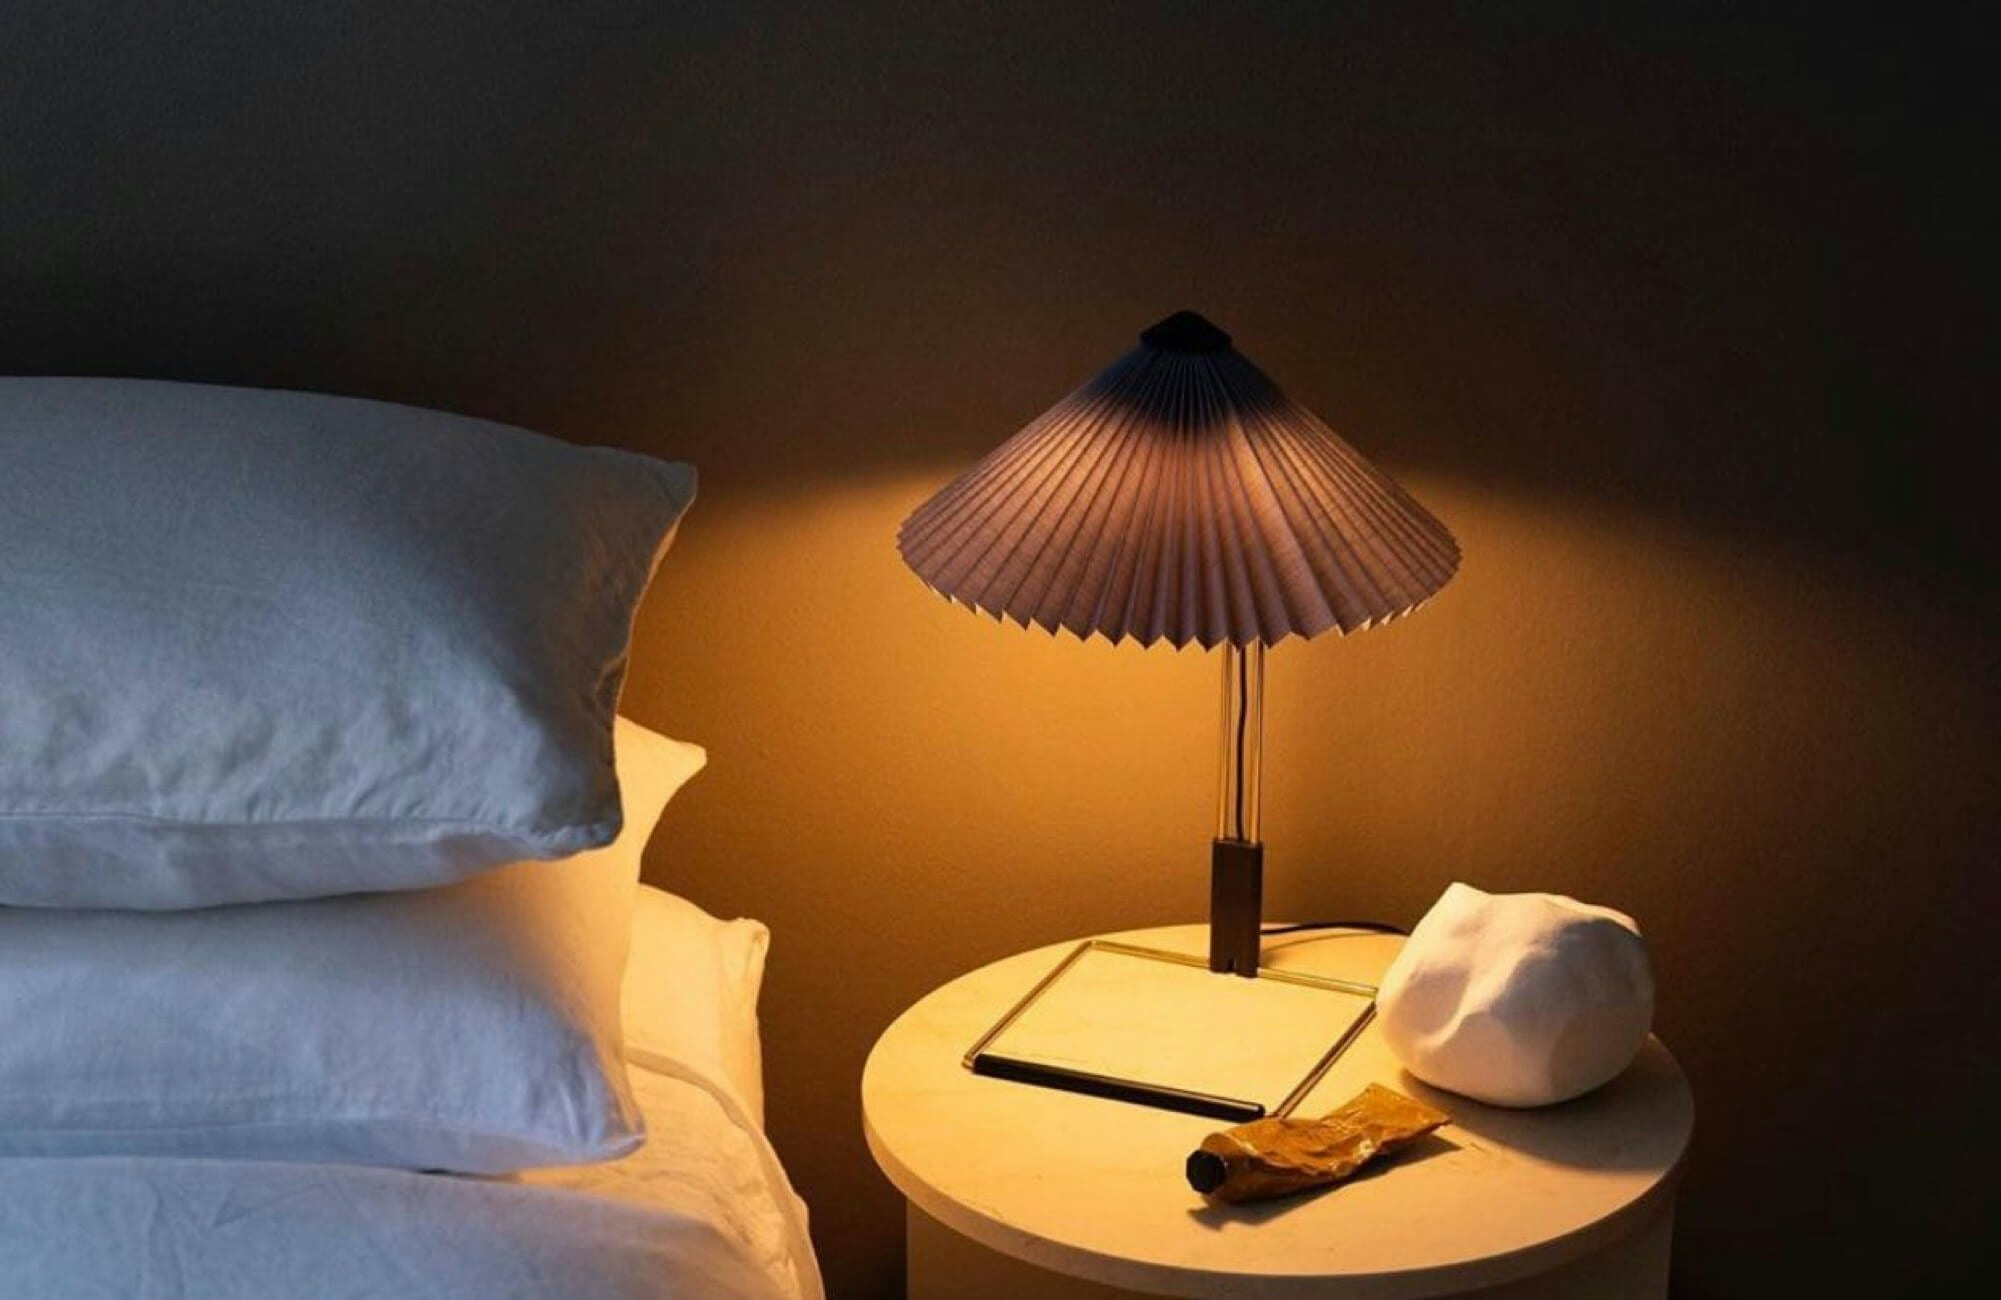 A lit lamp on a nightstand in a dark bedroom in front of a wall painted with SENTIMENTAL REASONS